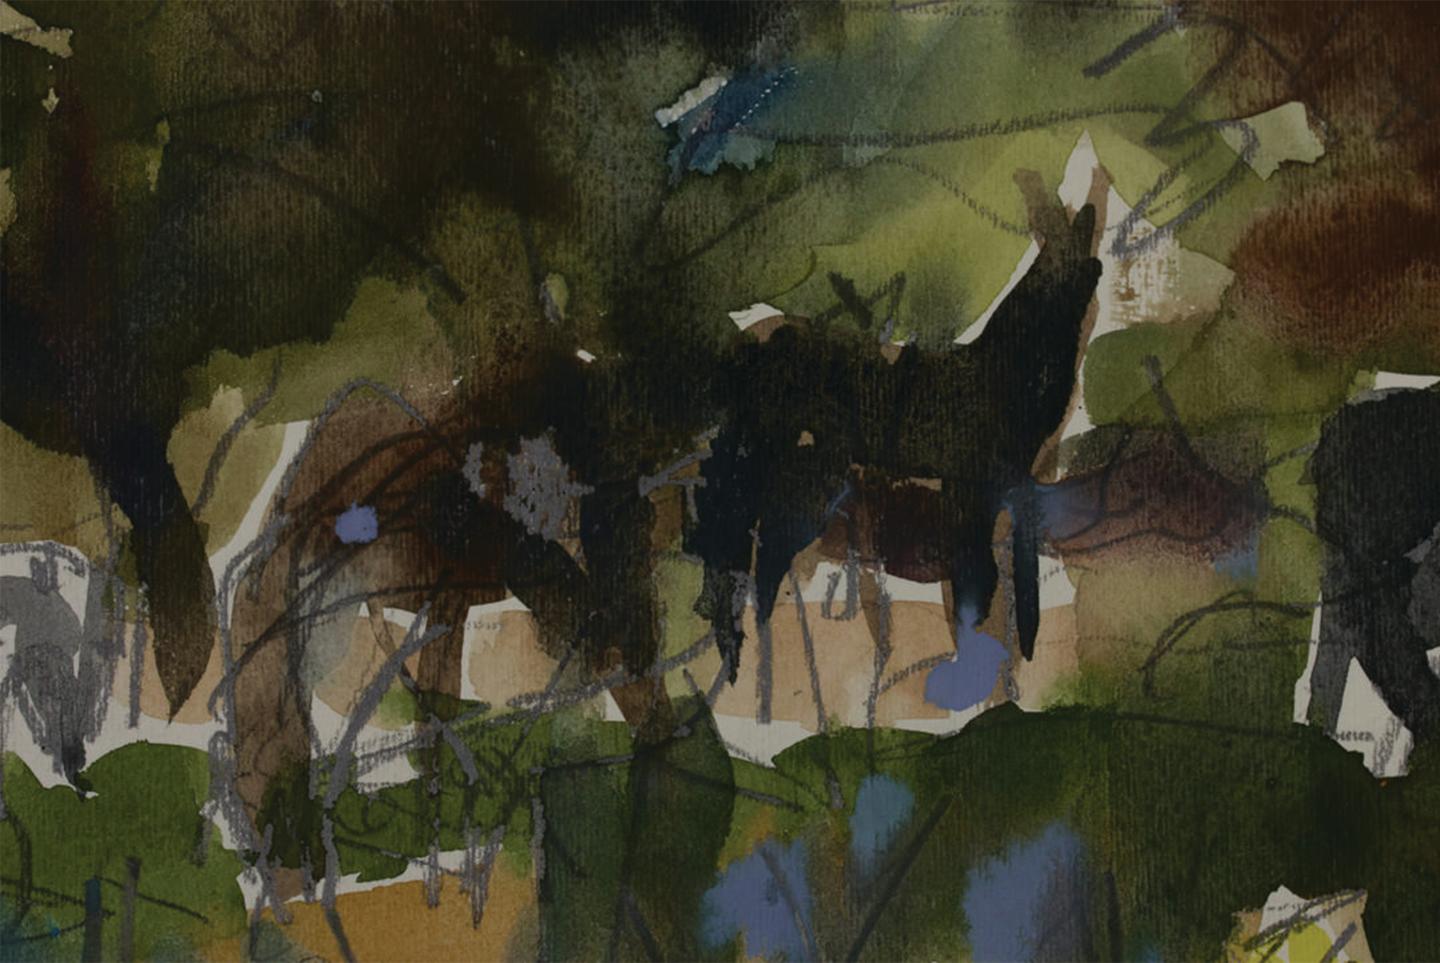 Horses in Landscape, Late 20th Century Watercolor by Cleveland School artist - Art by Joseph O'Sickey